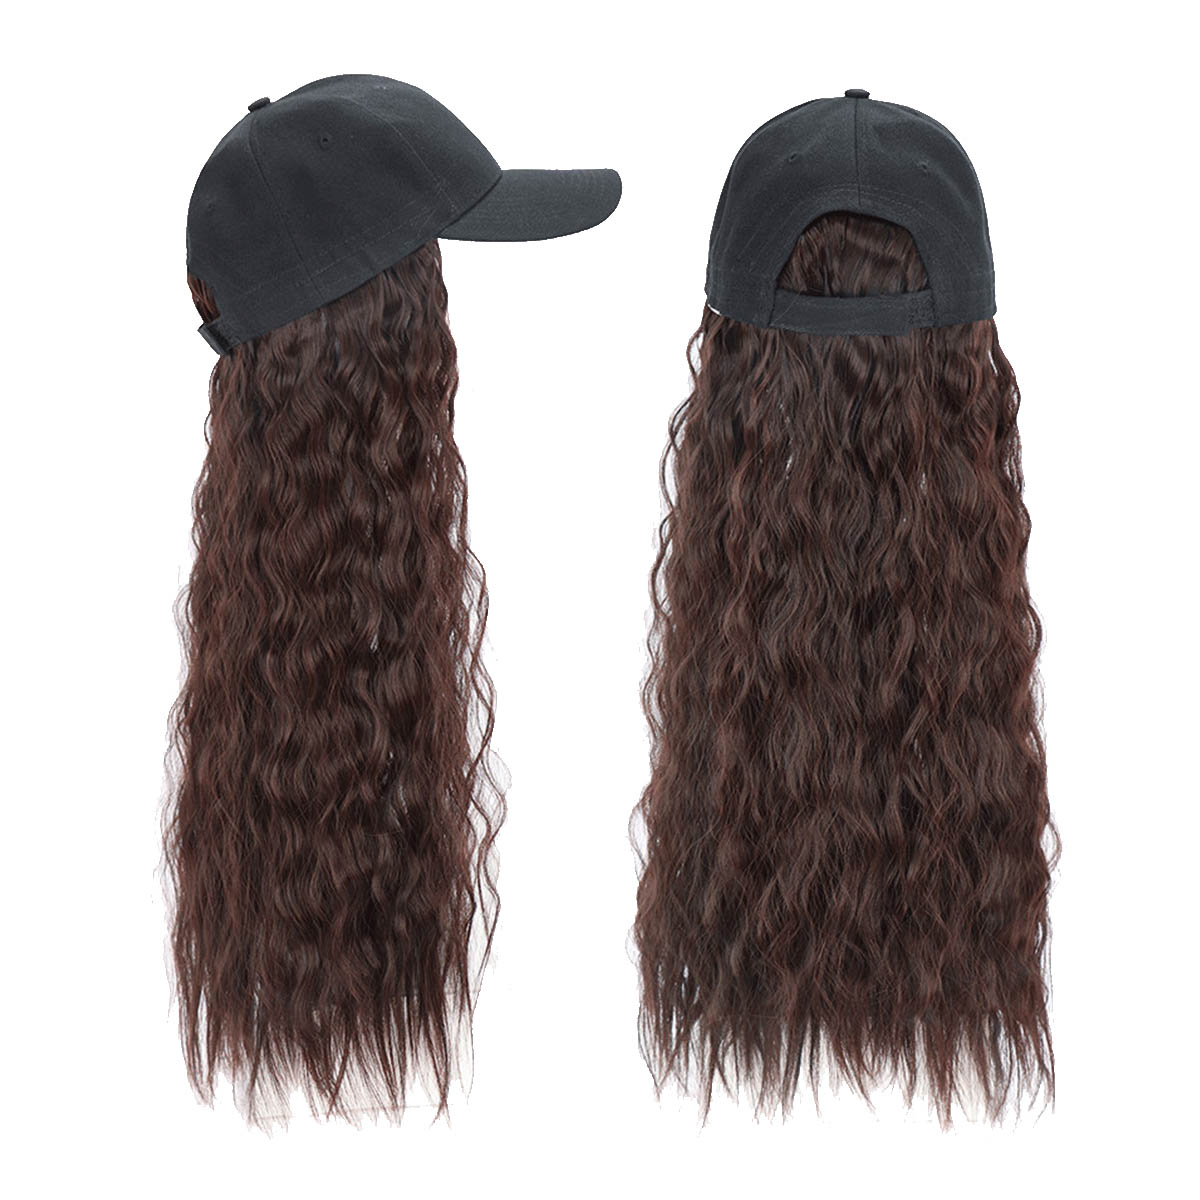 Woman-Girl-Cap-Wig-Hat-Light-Long-Wavy-Halloween-Party-Curly--Club-Winter-1619885-3